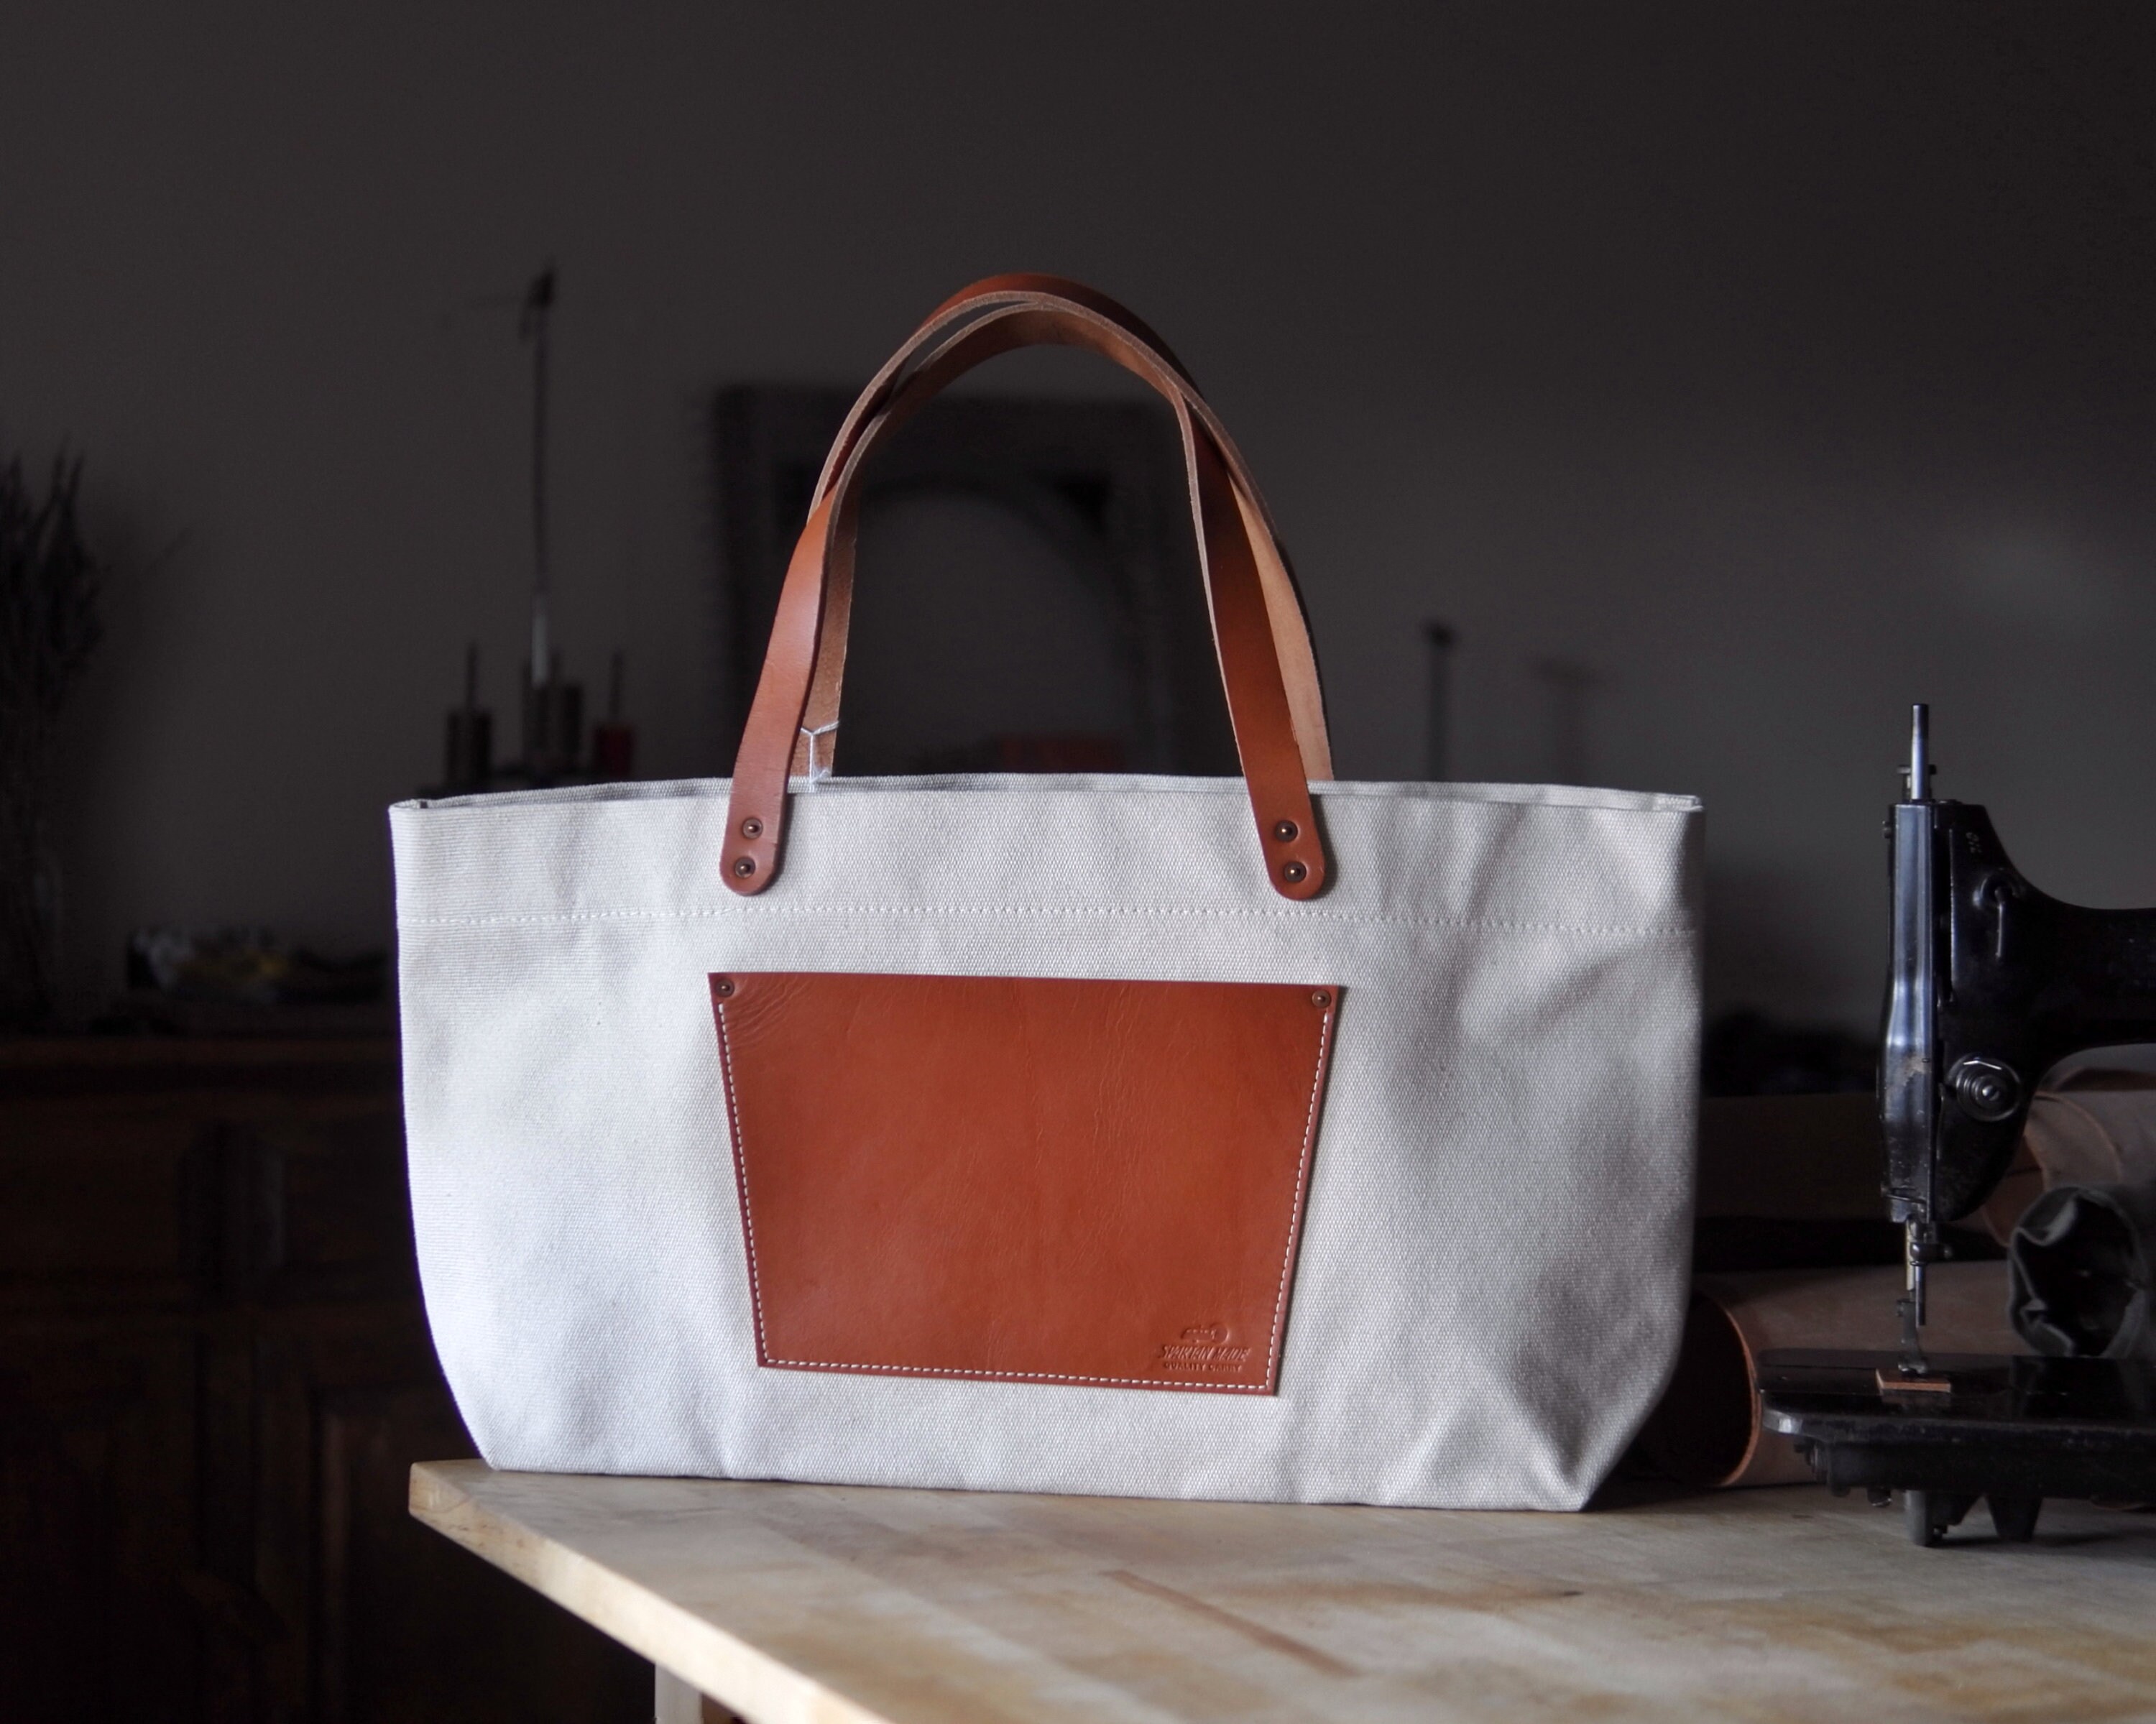 MARKET TOTE MADE BY FREE WOMEN – MADE FREE®